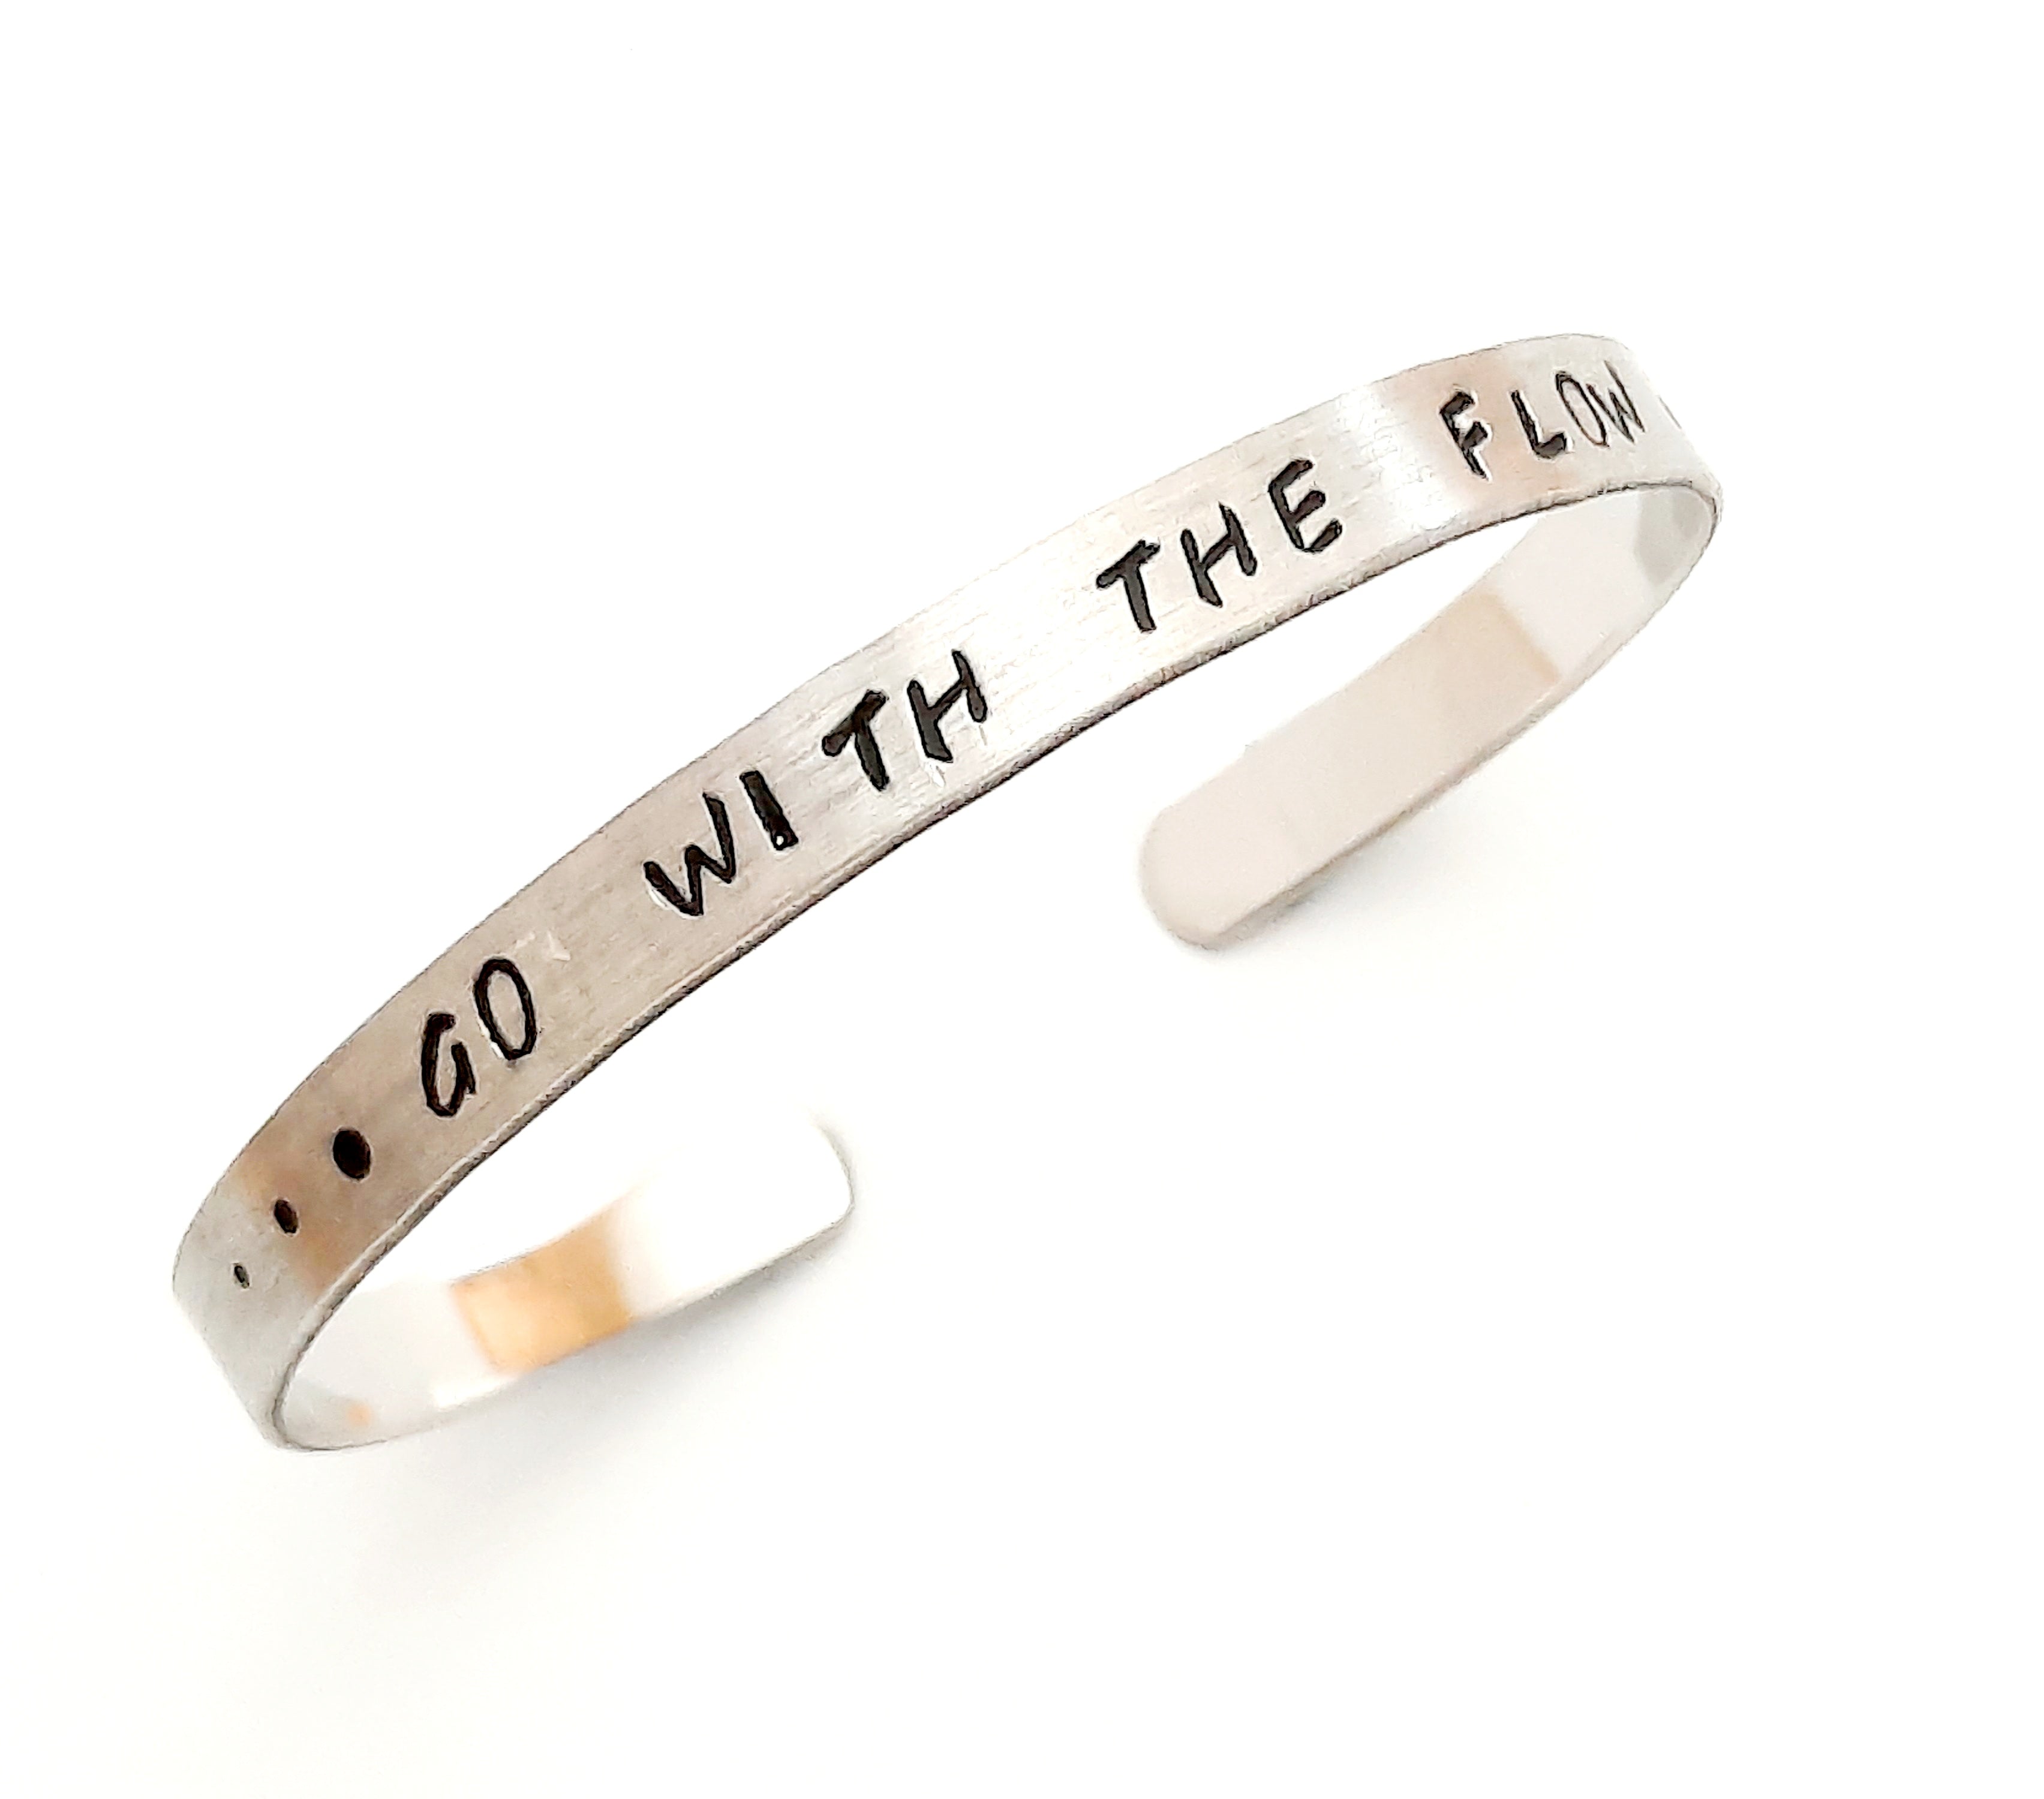 "Go with the flow" matte stainless steel ibiza engraved bracelet